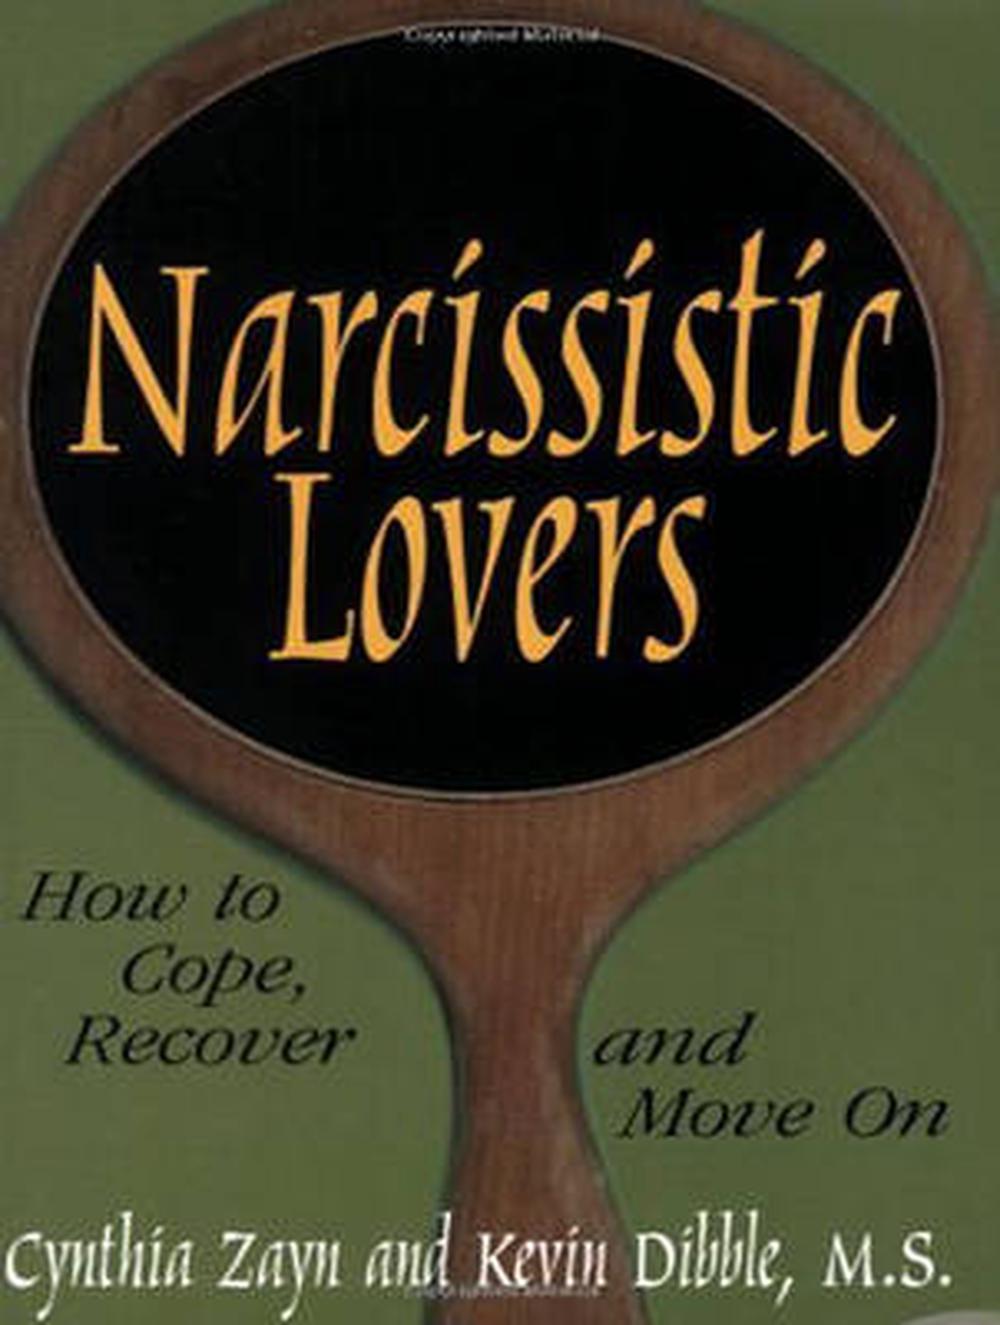 Narcissistic Lovers How to Cope, Recover and Move on by Cynthia Zayn (English) eBay